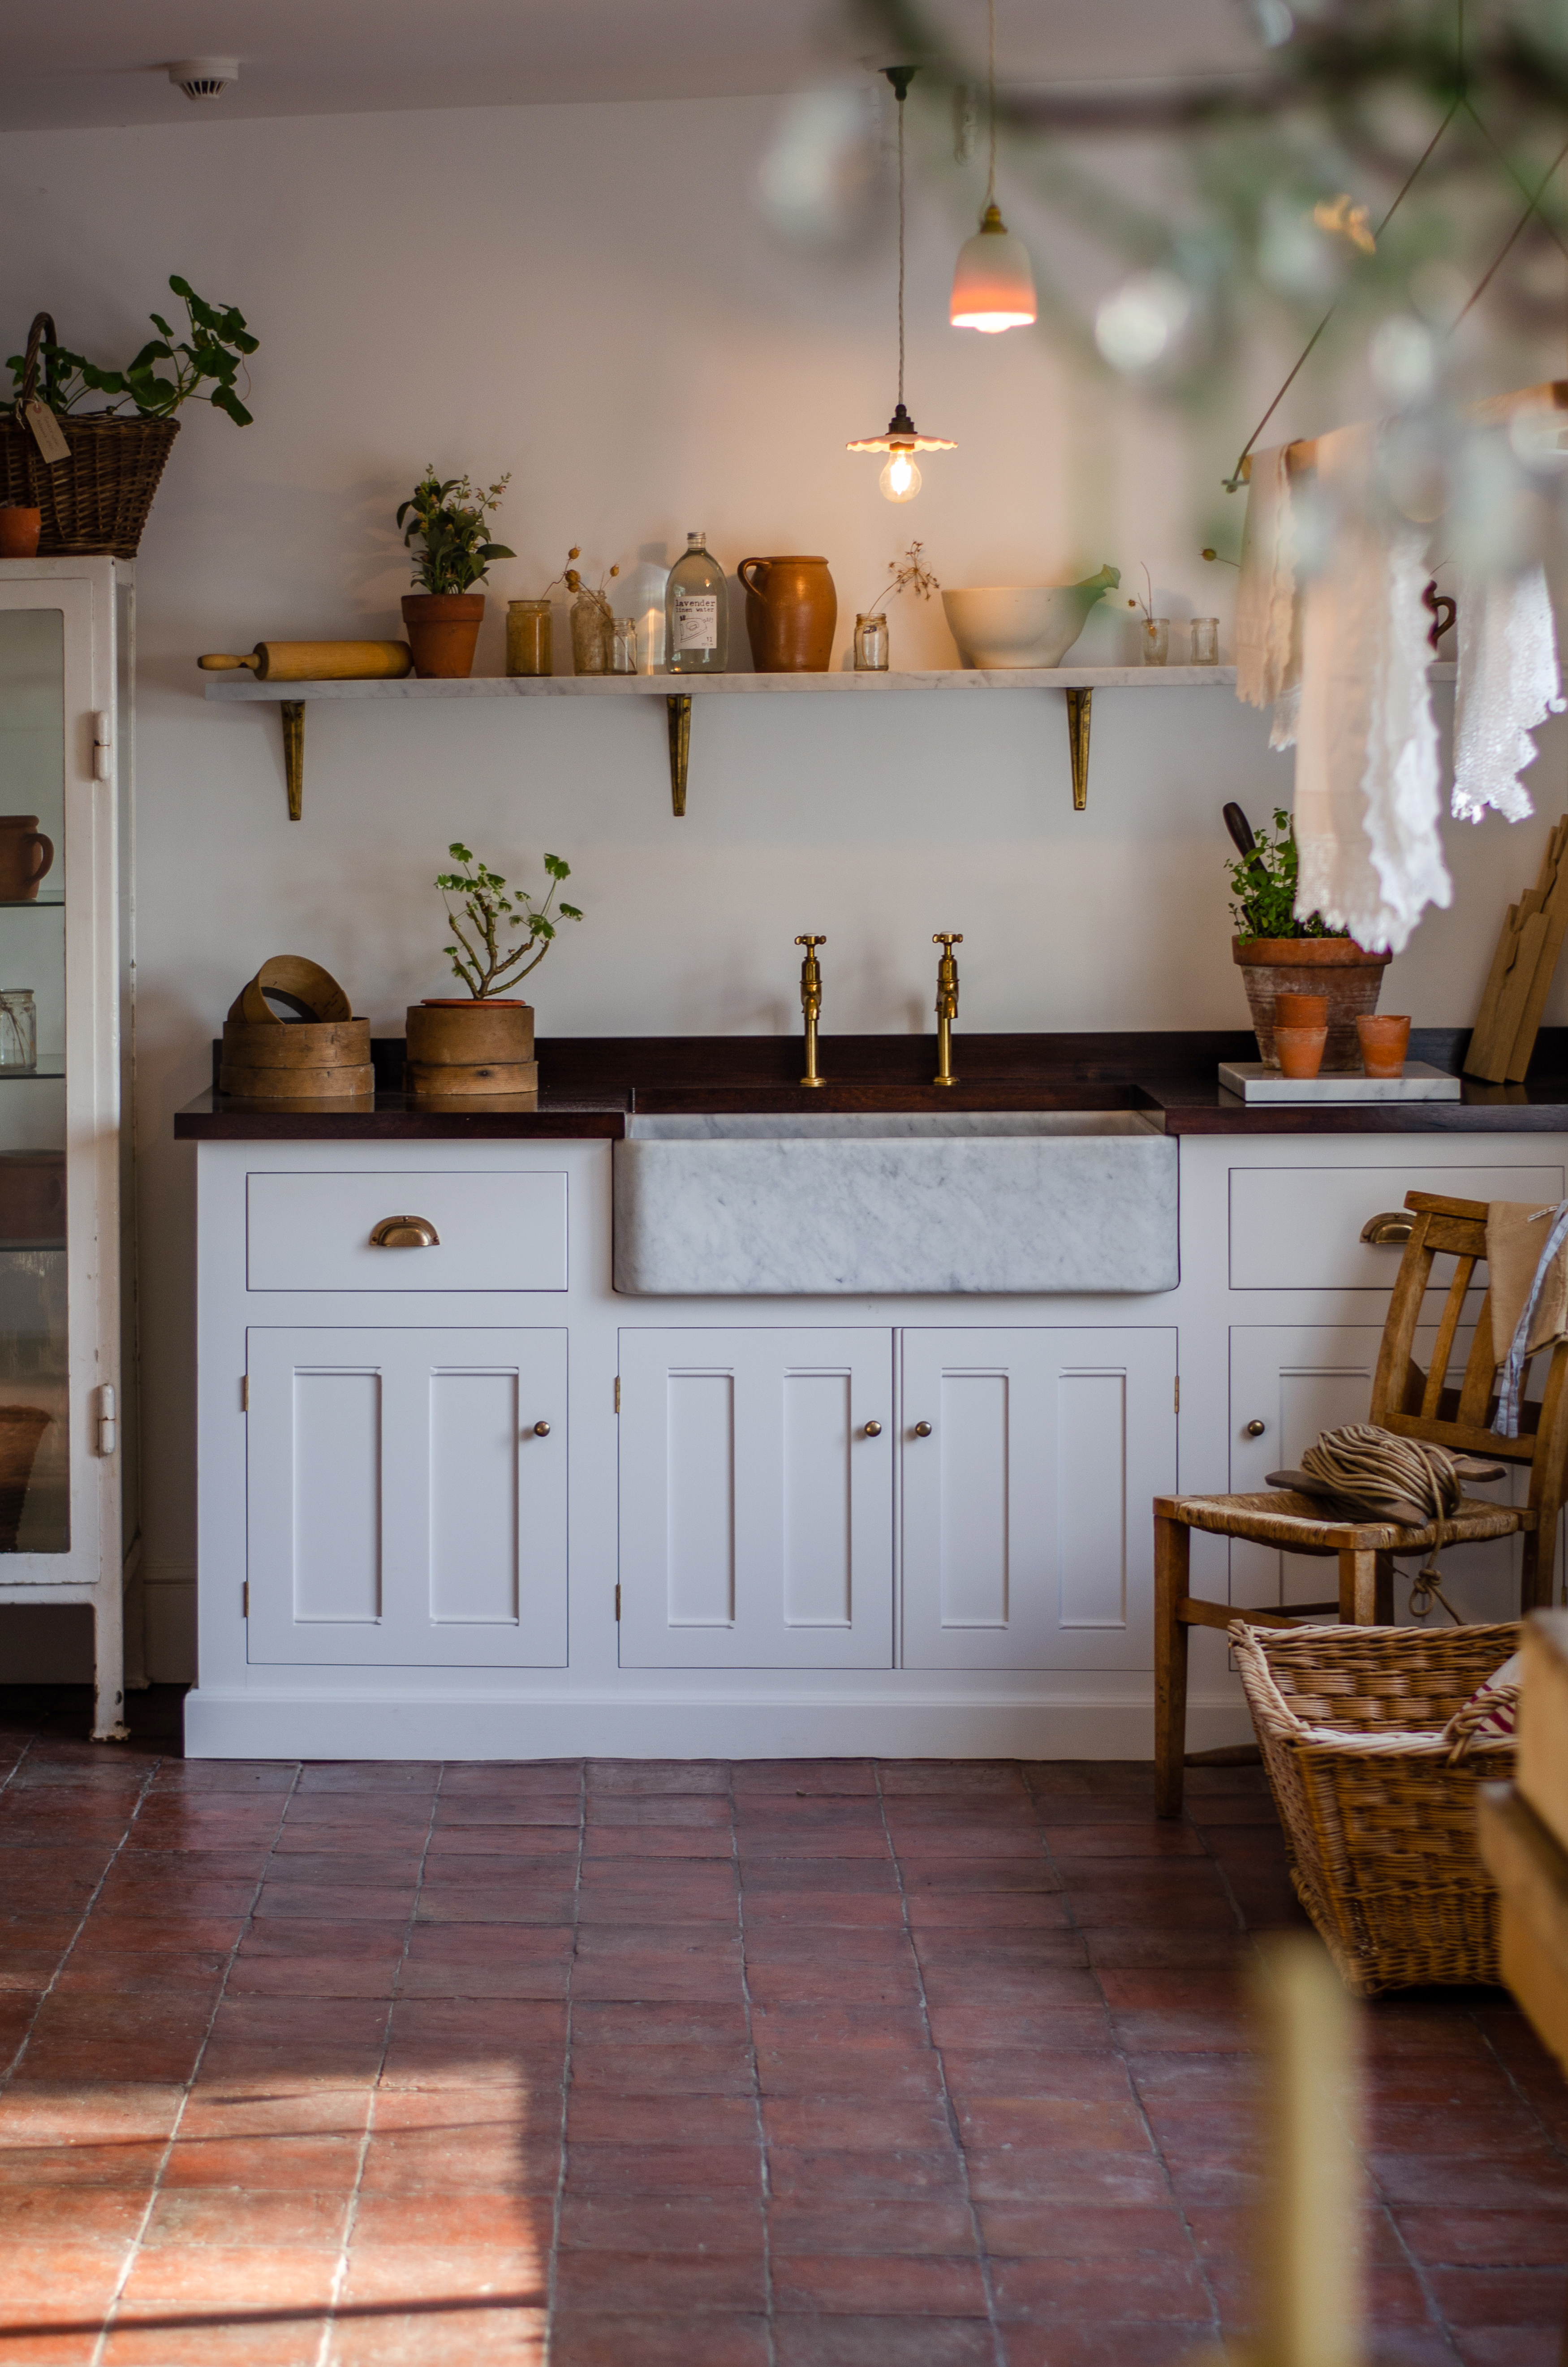 Our grand Classic Millhouse Scullery Kitchen accentuated with plenty of greenery.